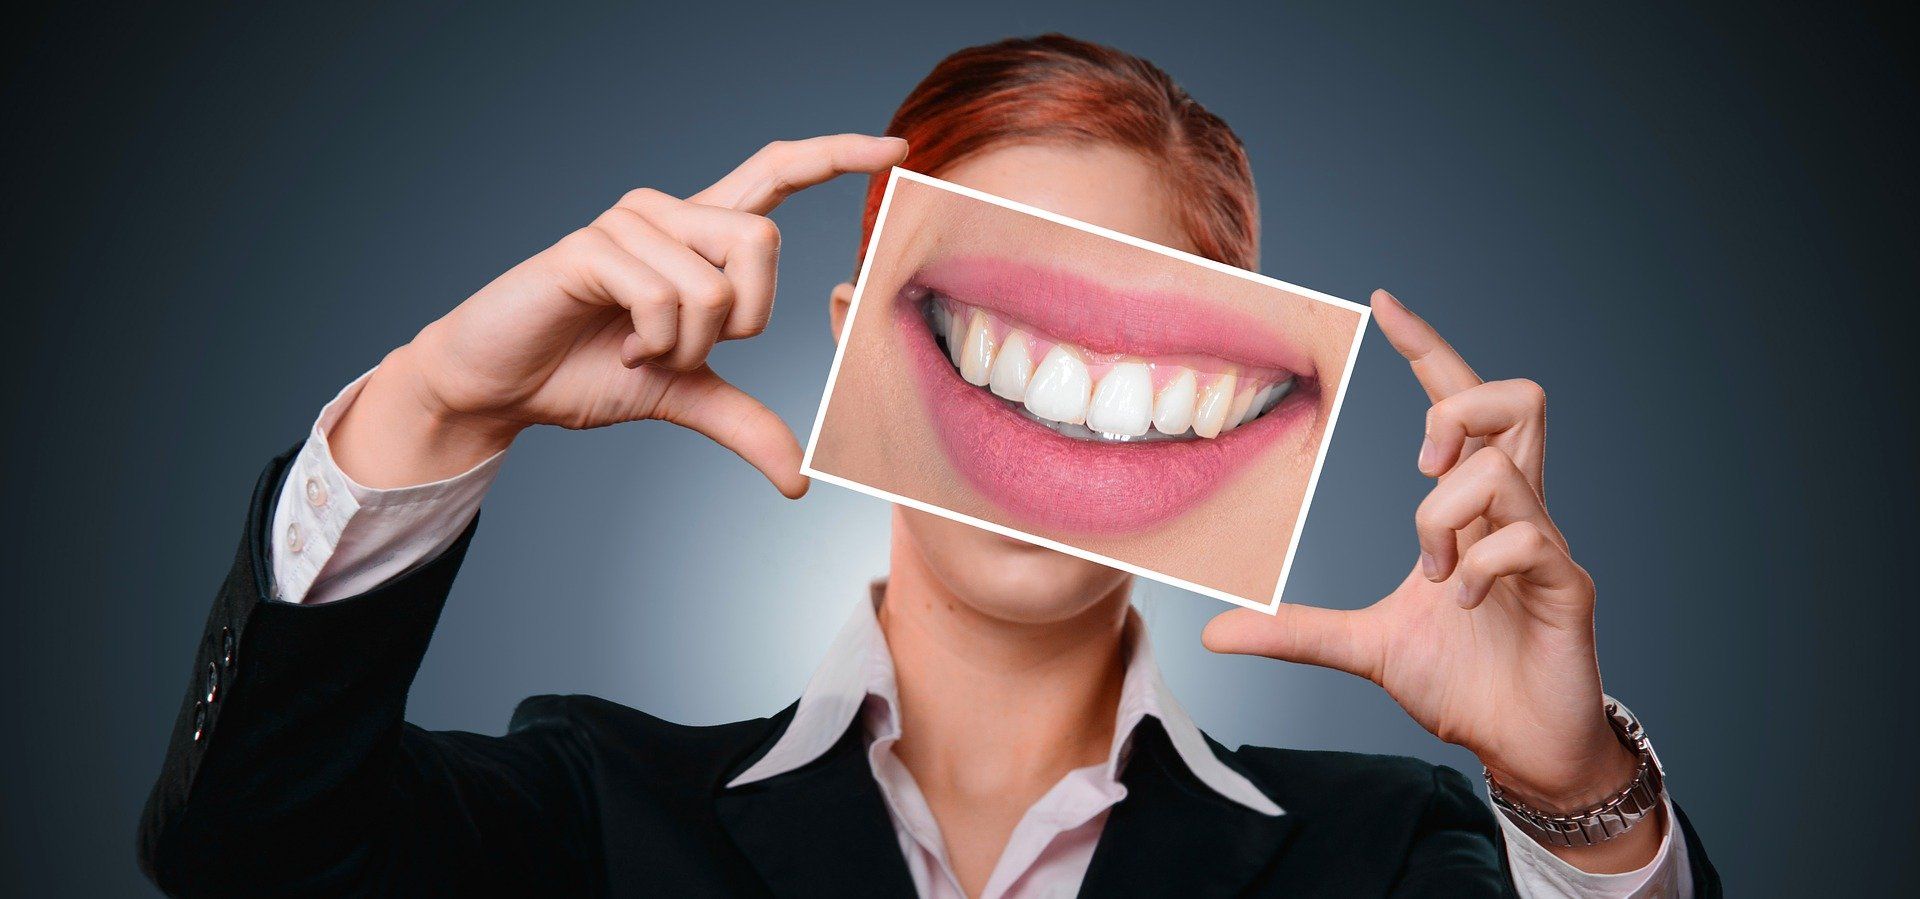 Dental veneers can give a confident smile